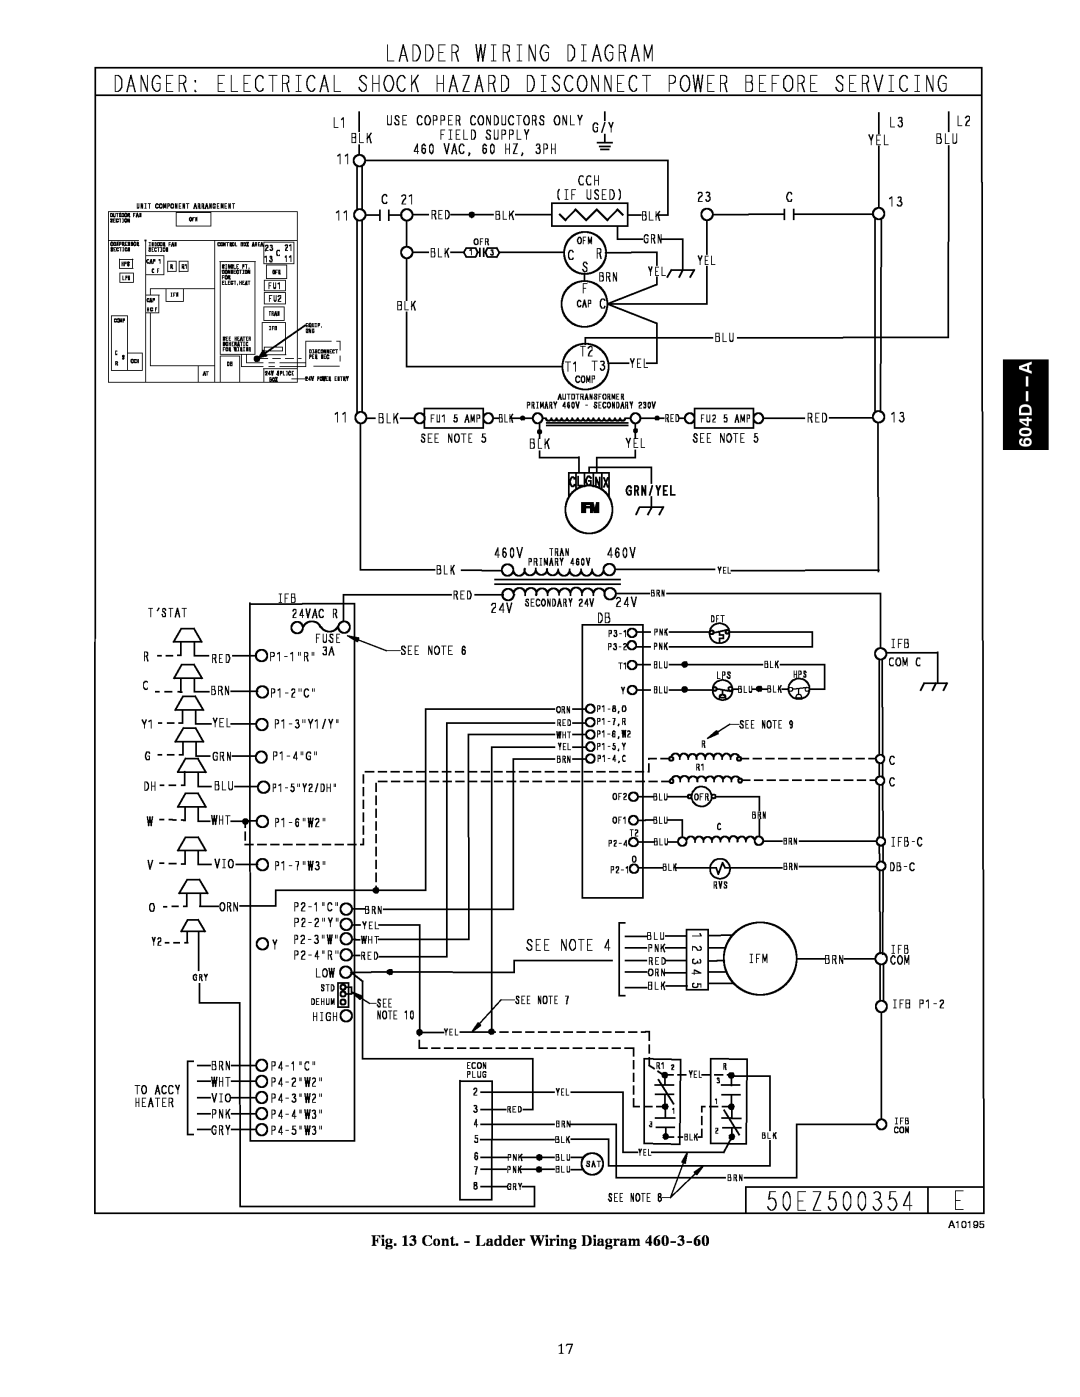 Bryant 604D--A installation instructions Cont. - Ladder Wiring Diagram, 604D-- --A 